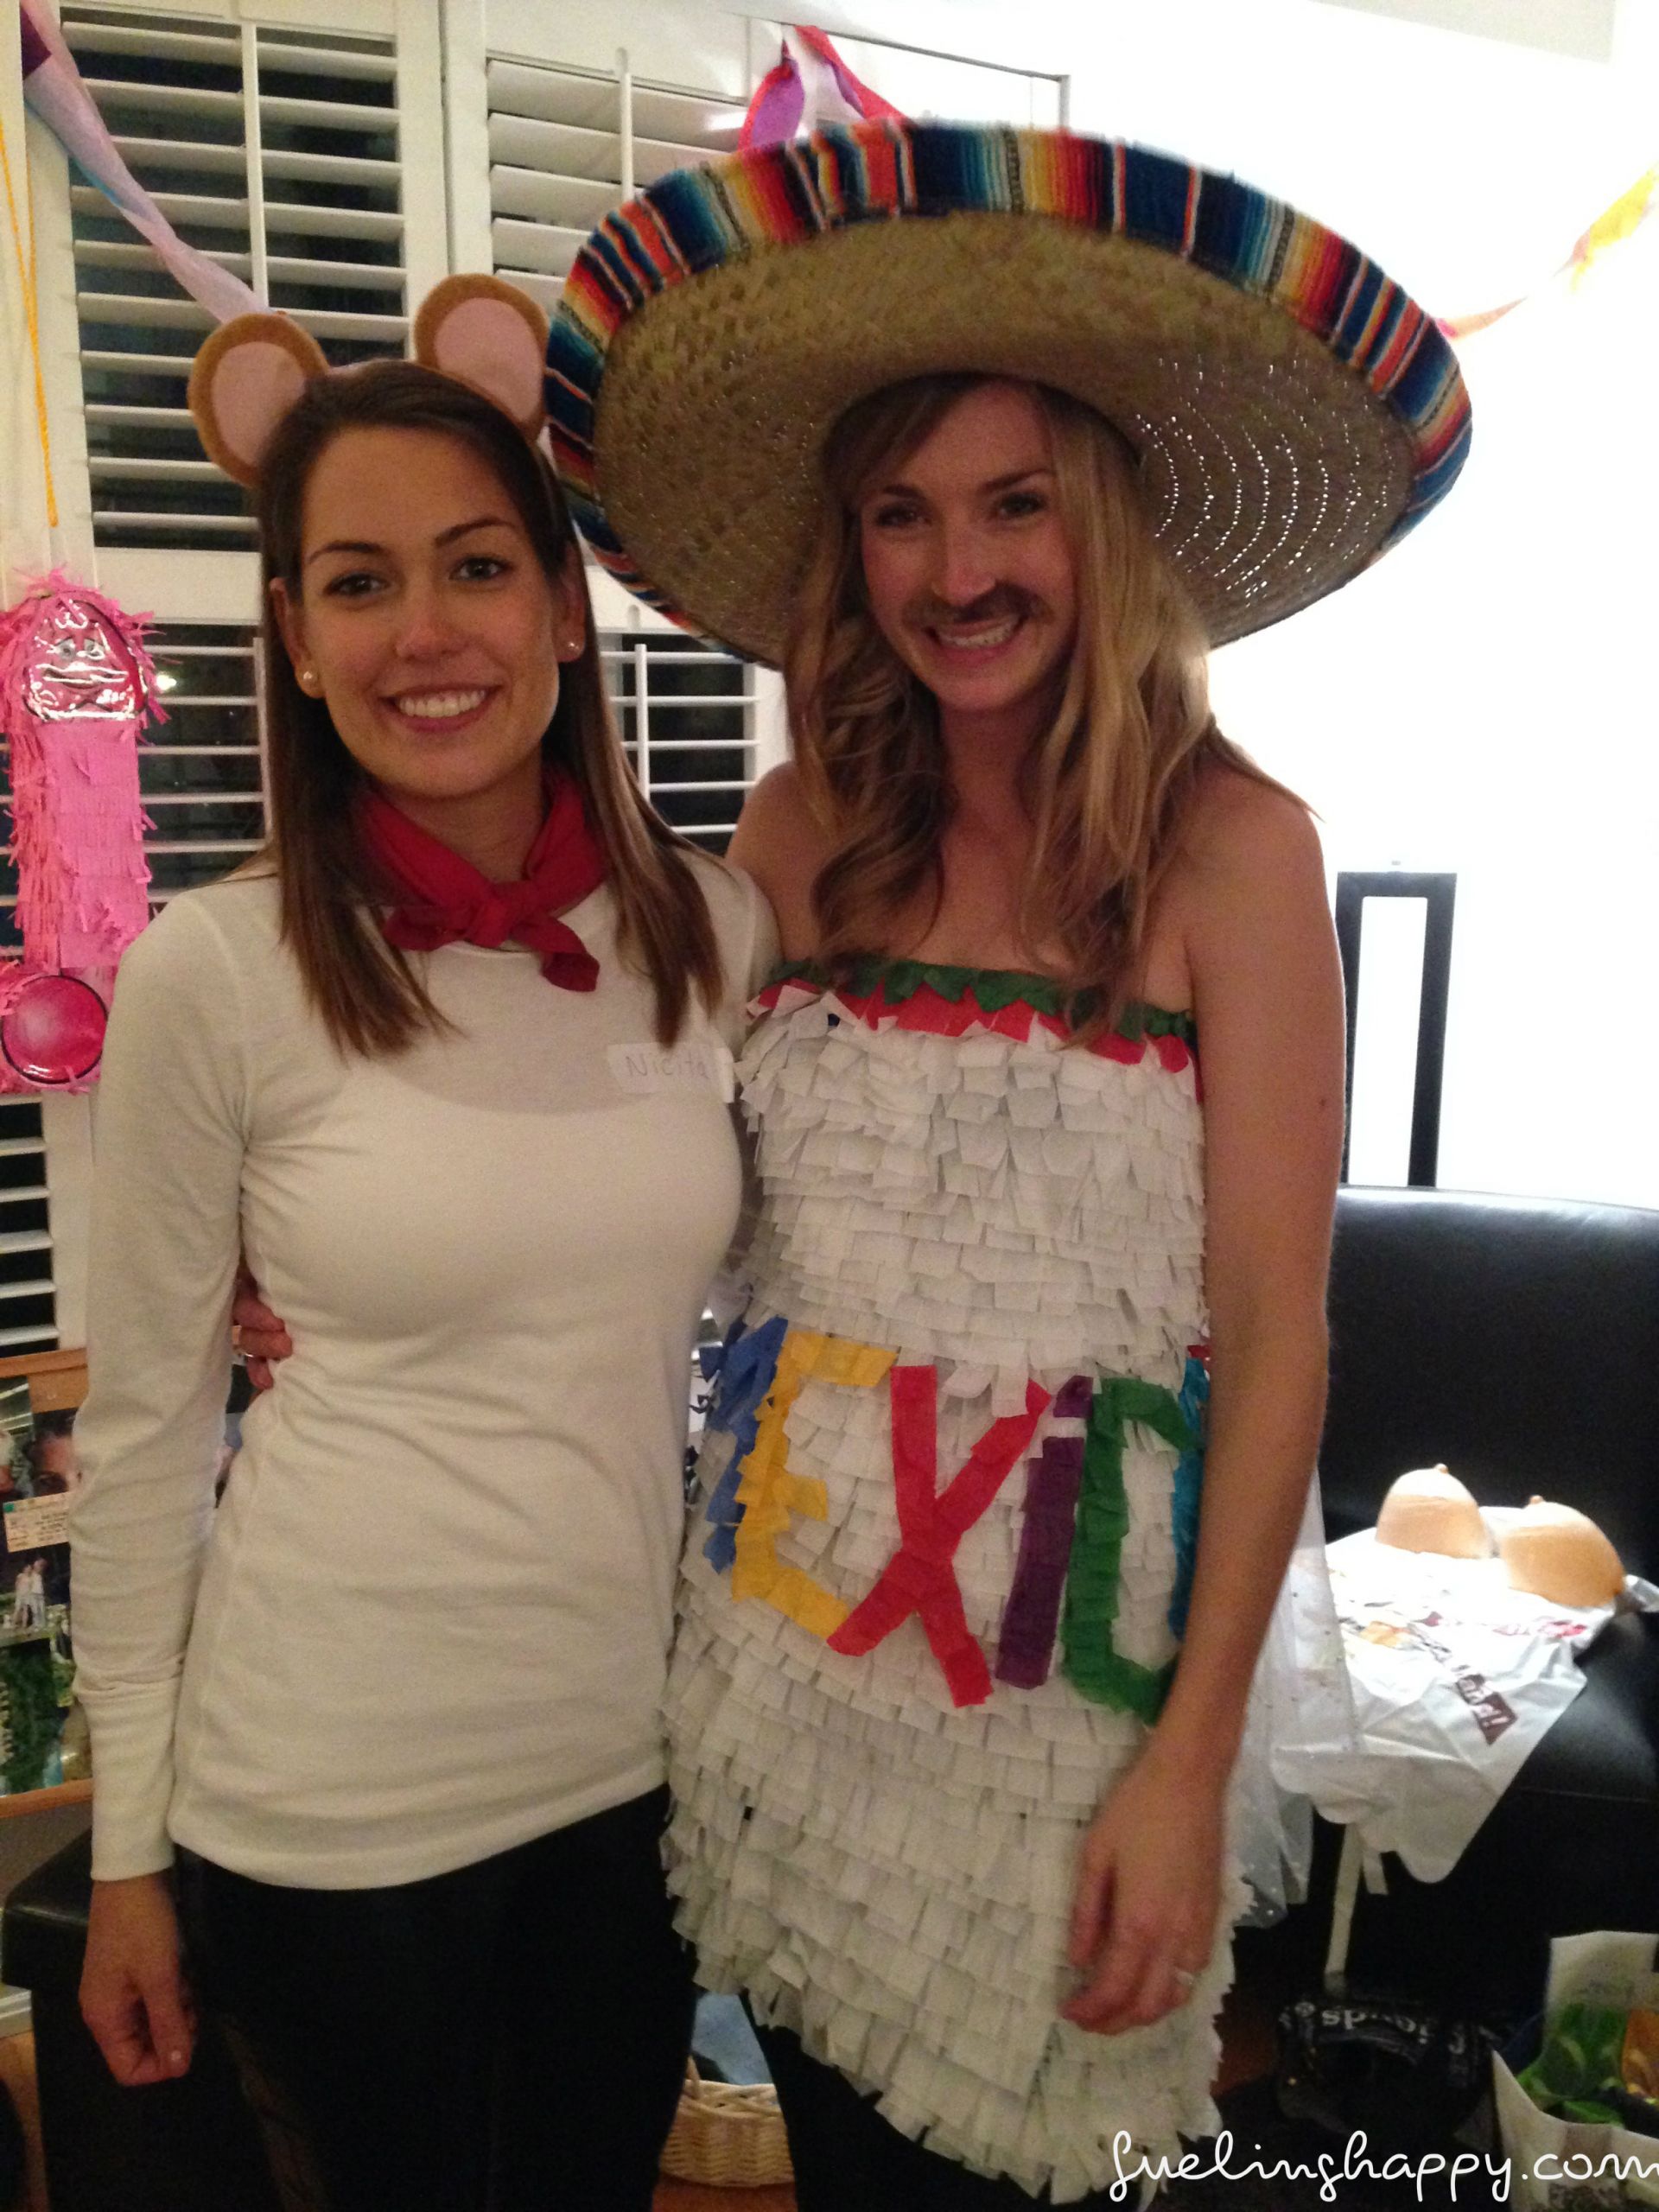 Mexico Bachelorette Party Ideas
 A Mexican Bachelorette and Waffle Date